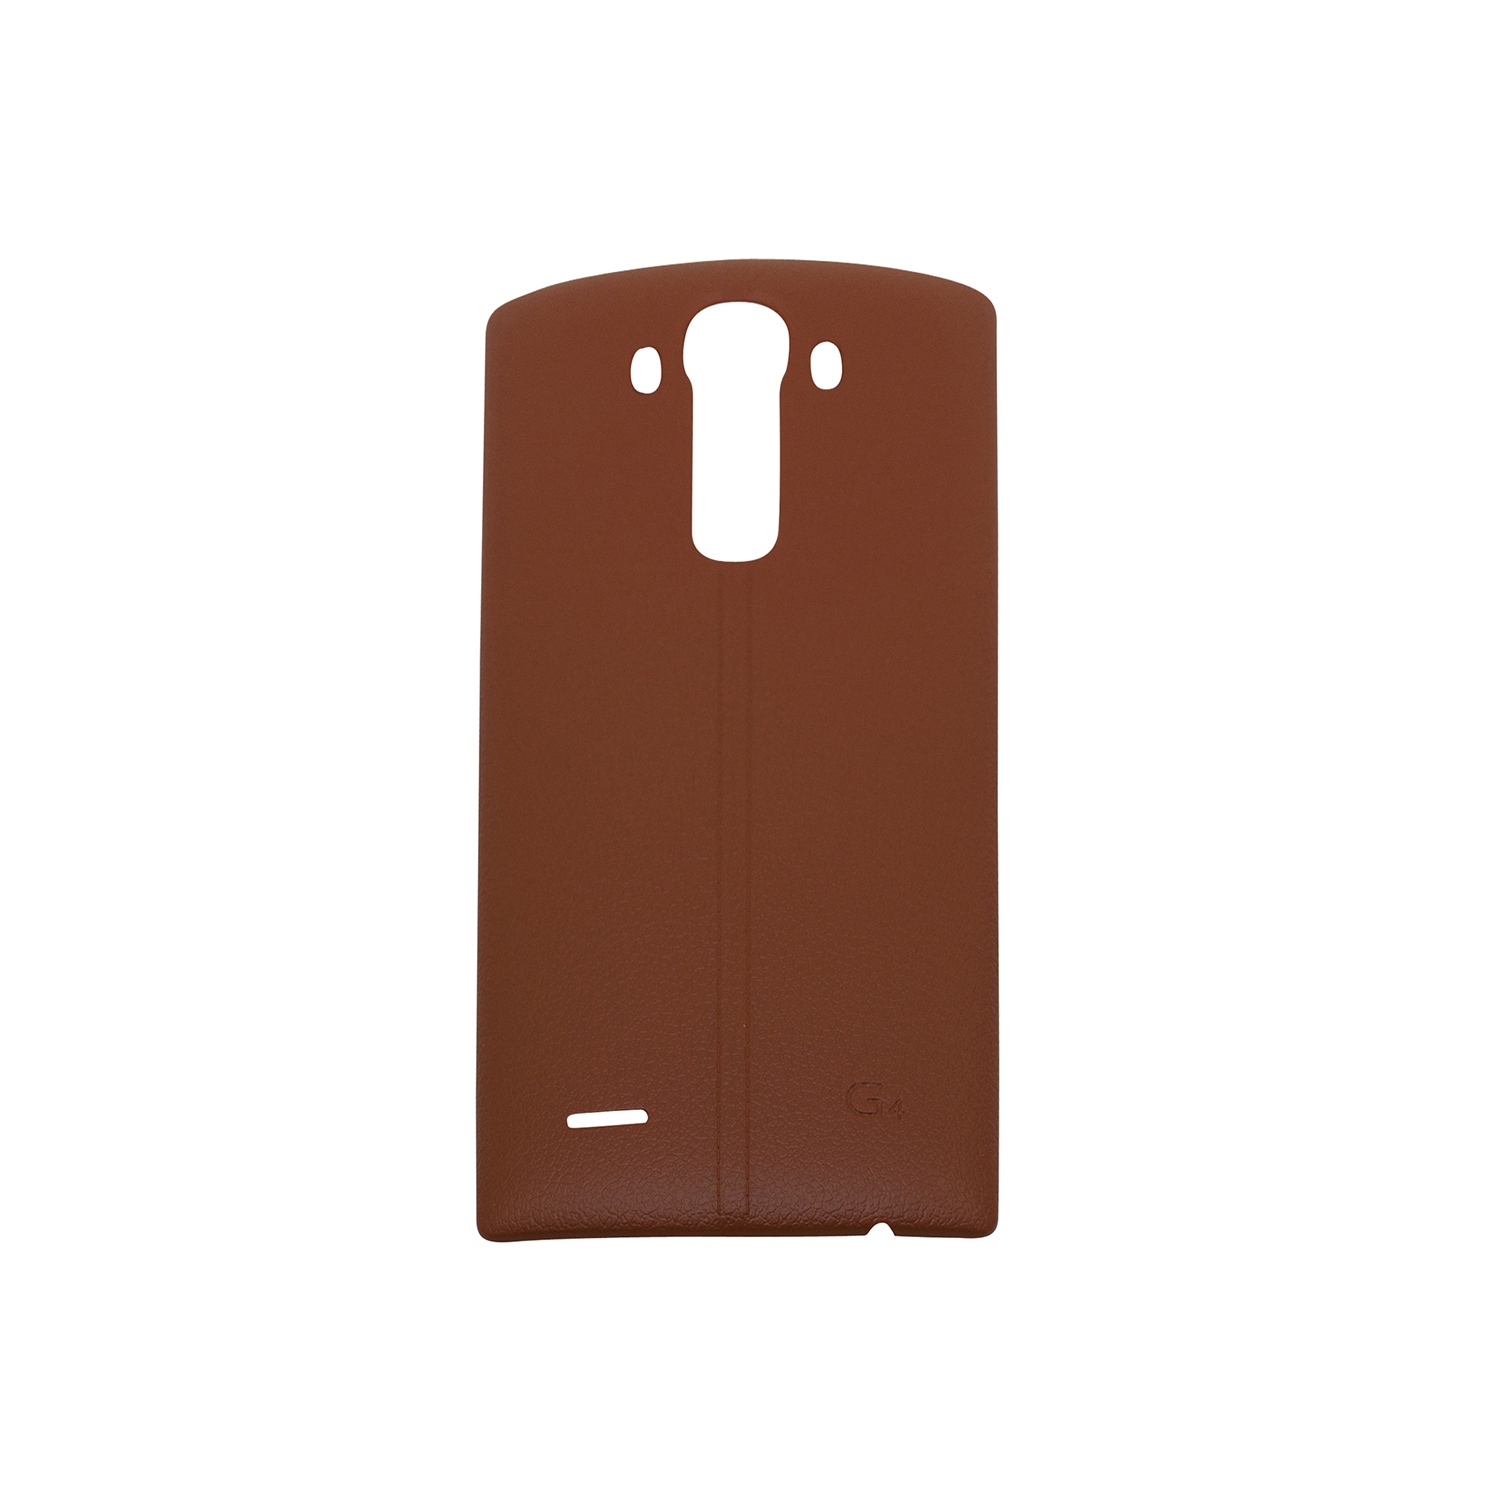 LG G4 Back Battery Door Cover Replacement Housing - Brown